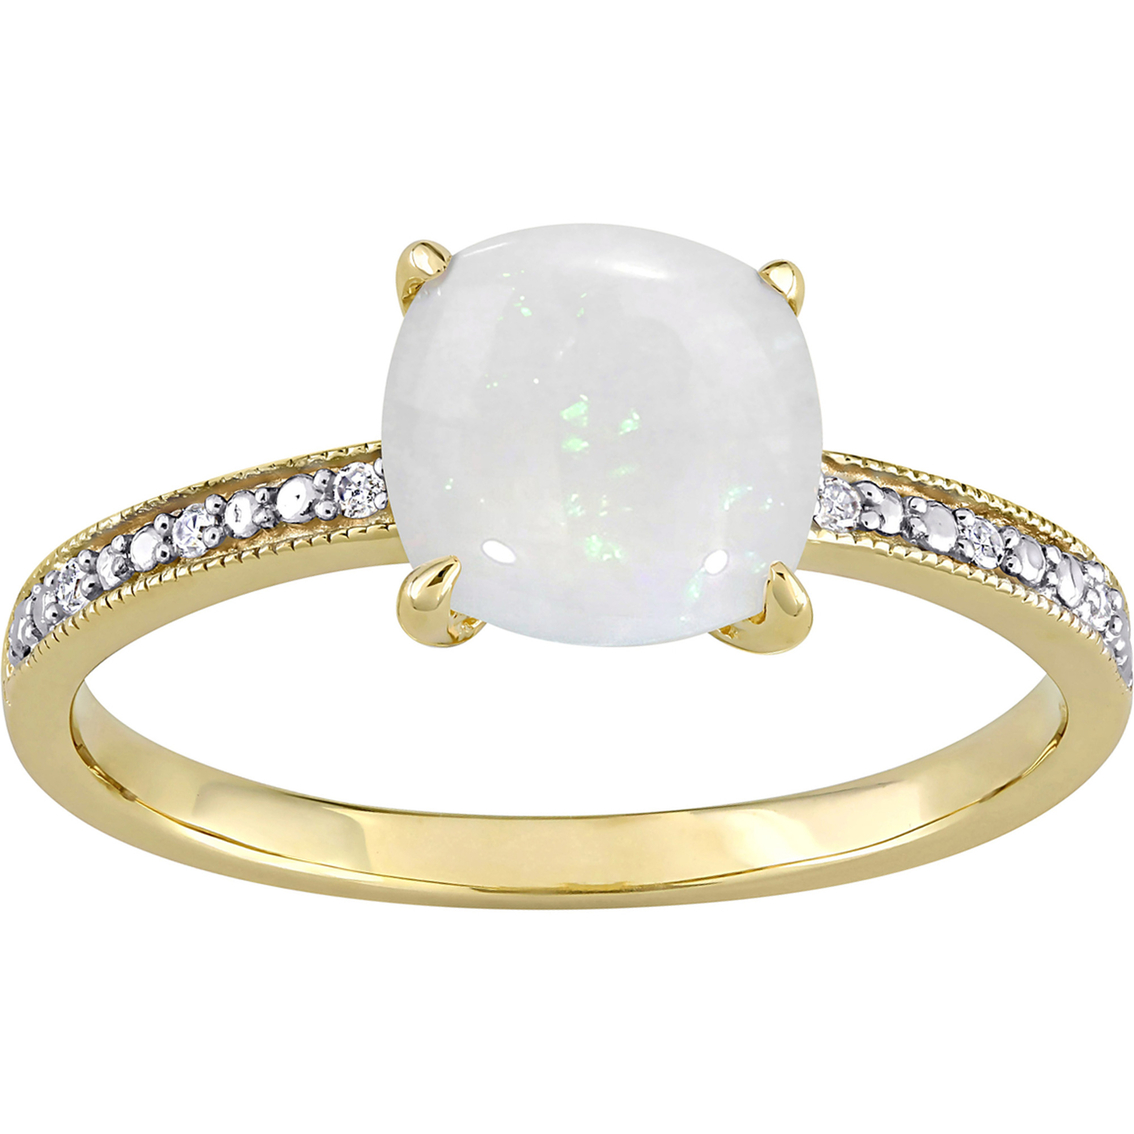 Sofia B. 10k Yellow Gold 1 1/3 Ctw Opal And Diamond Accent Ring ...